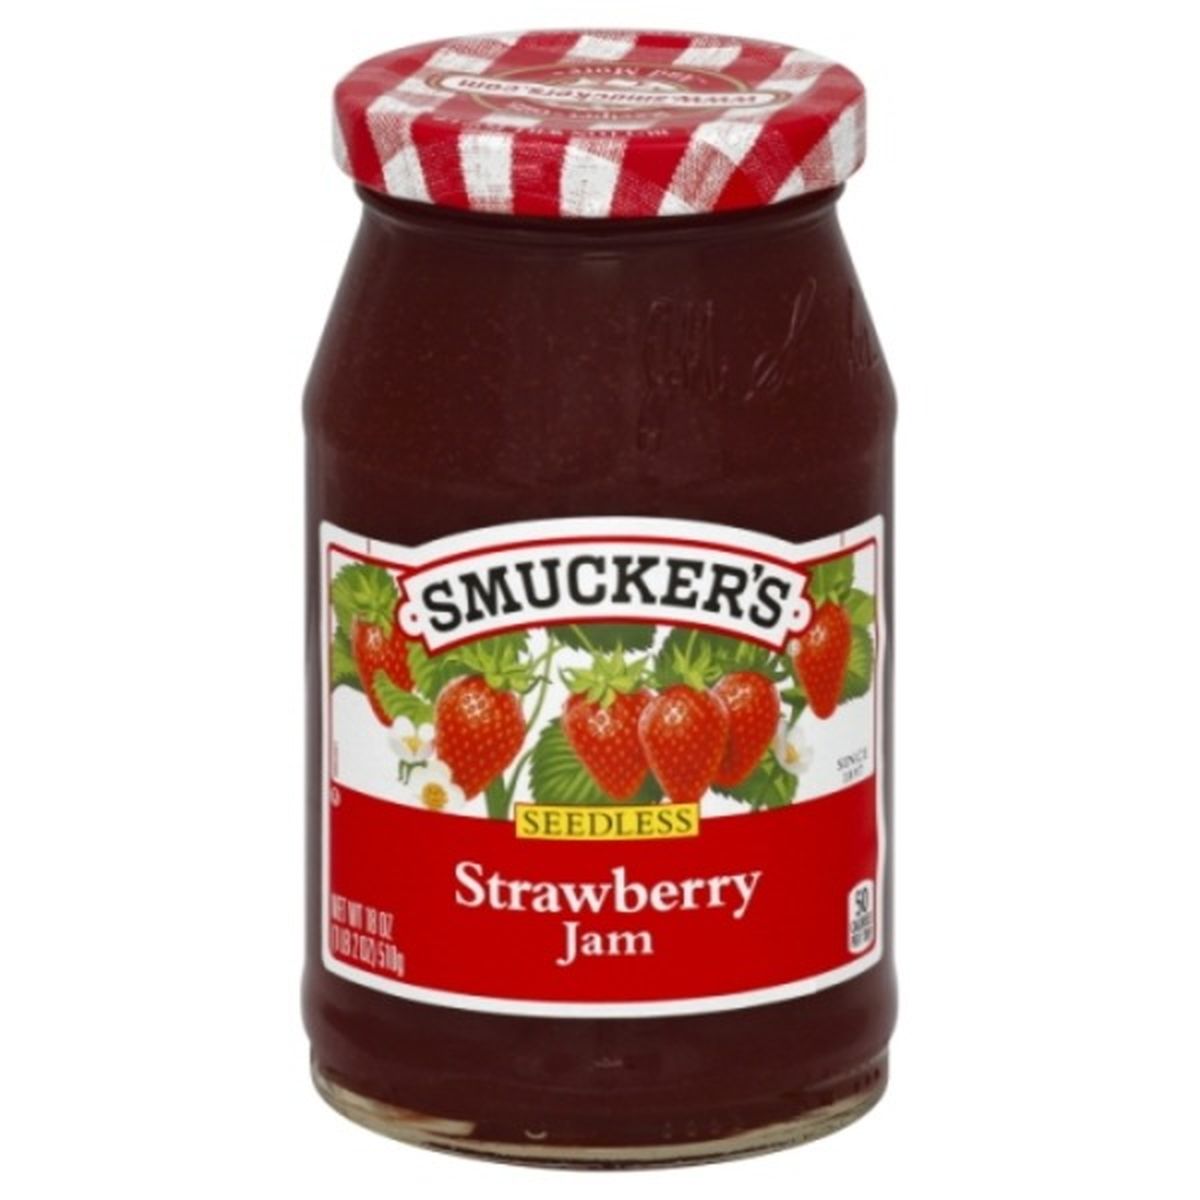 Calories in Smucker's Jam, Strawberry, Seedless